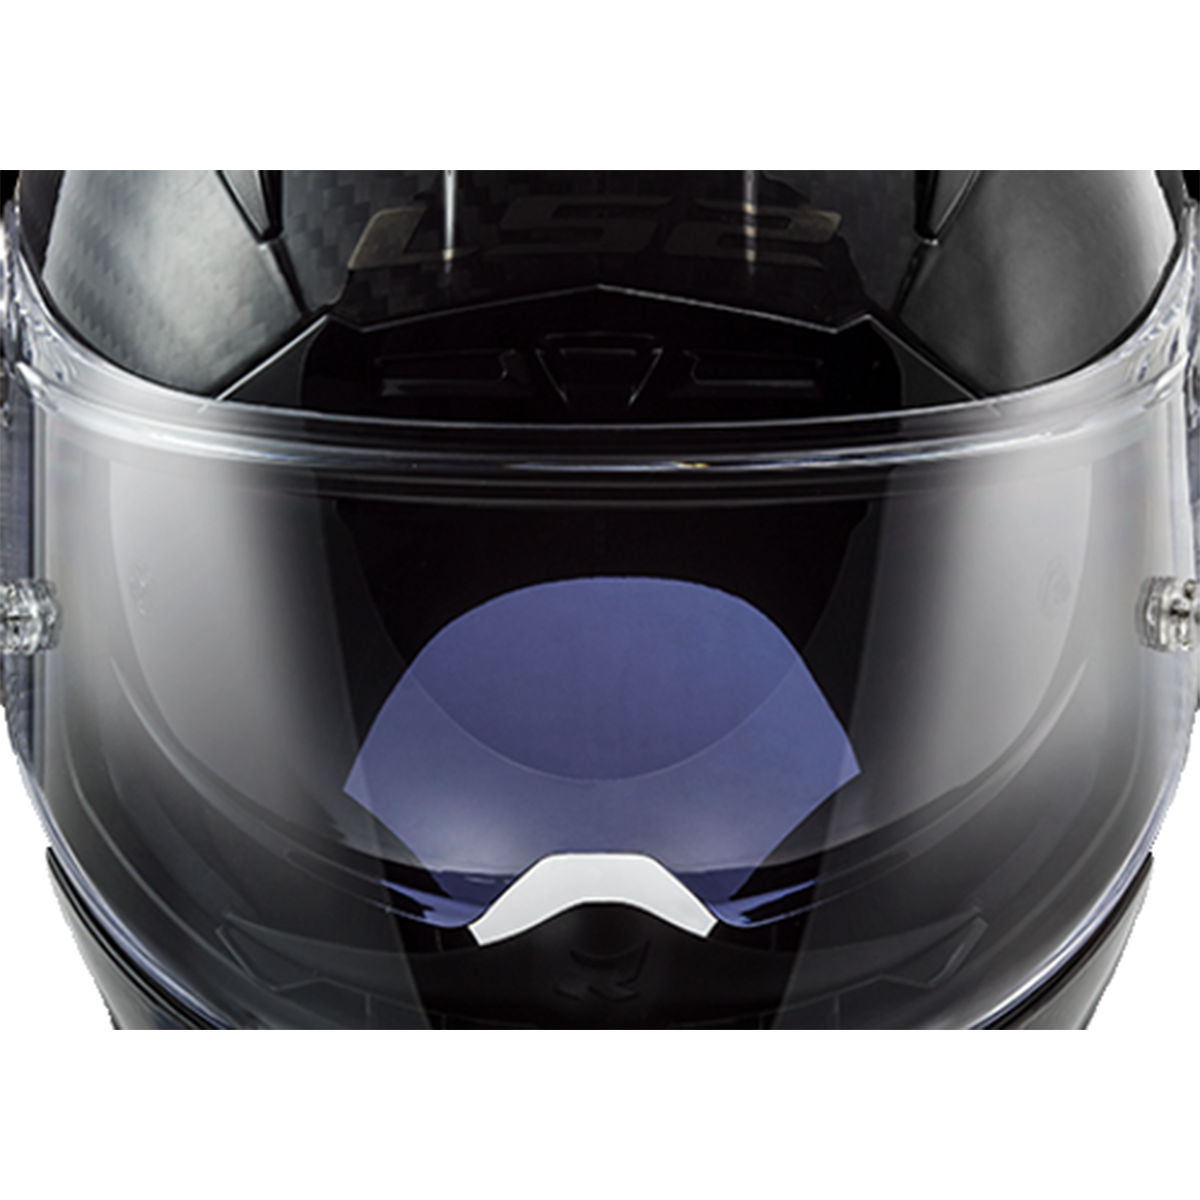 LS2 Motorcycle Helmets 2021 | Introducing The Challenger Carbon Street Collection